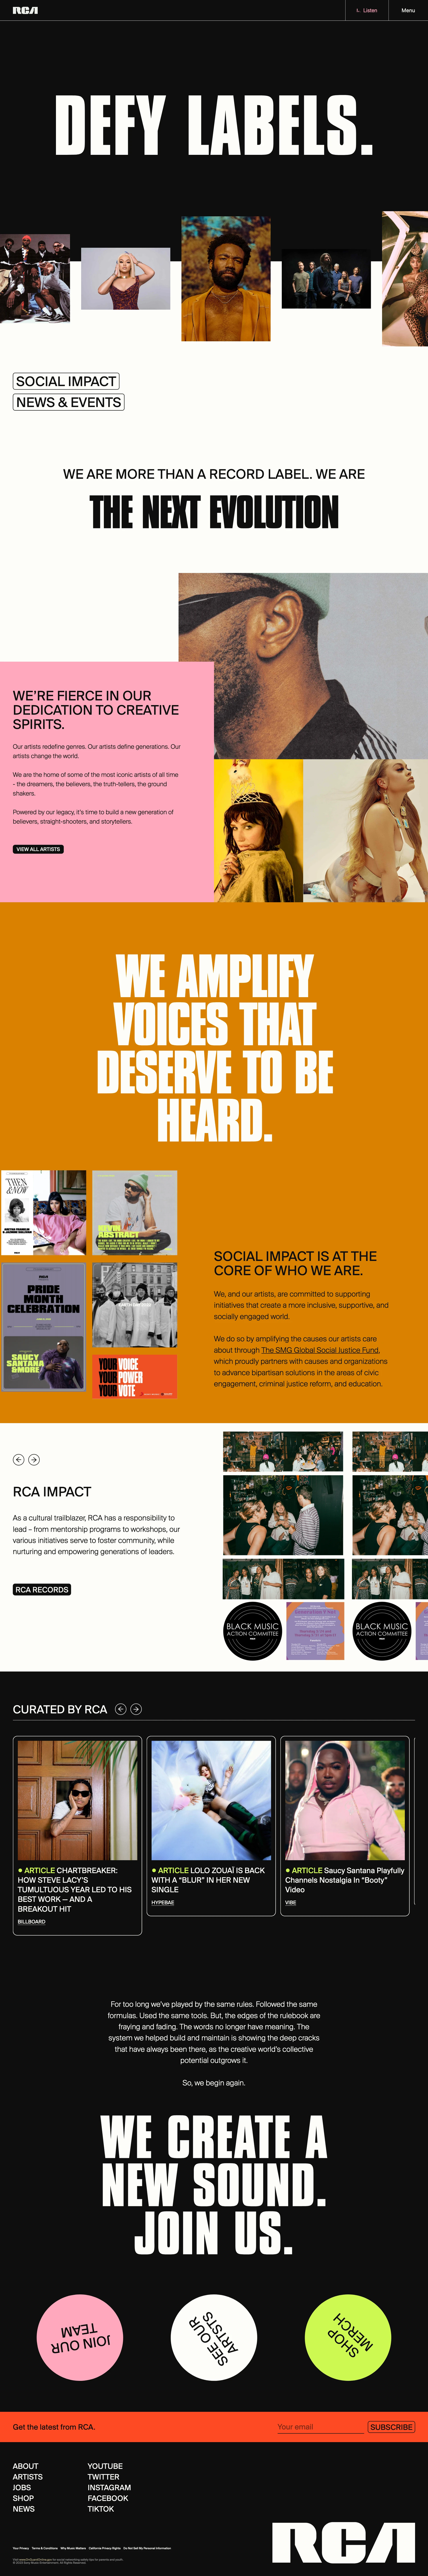 RCA Records Landing Page Example: We are more than a record label. We are advocates for change.